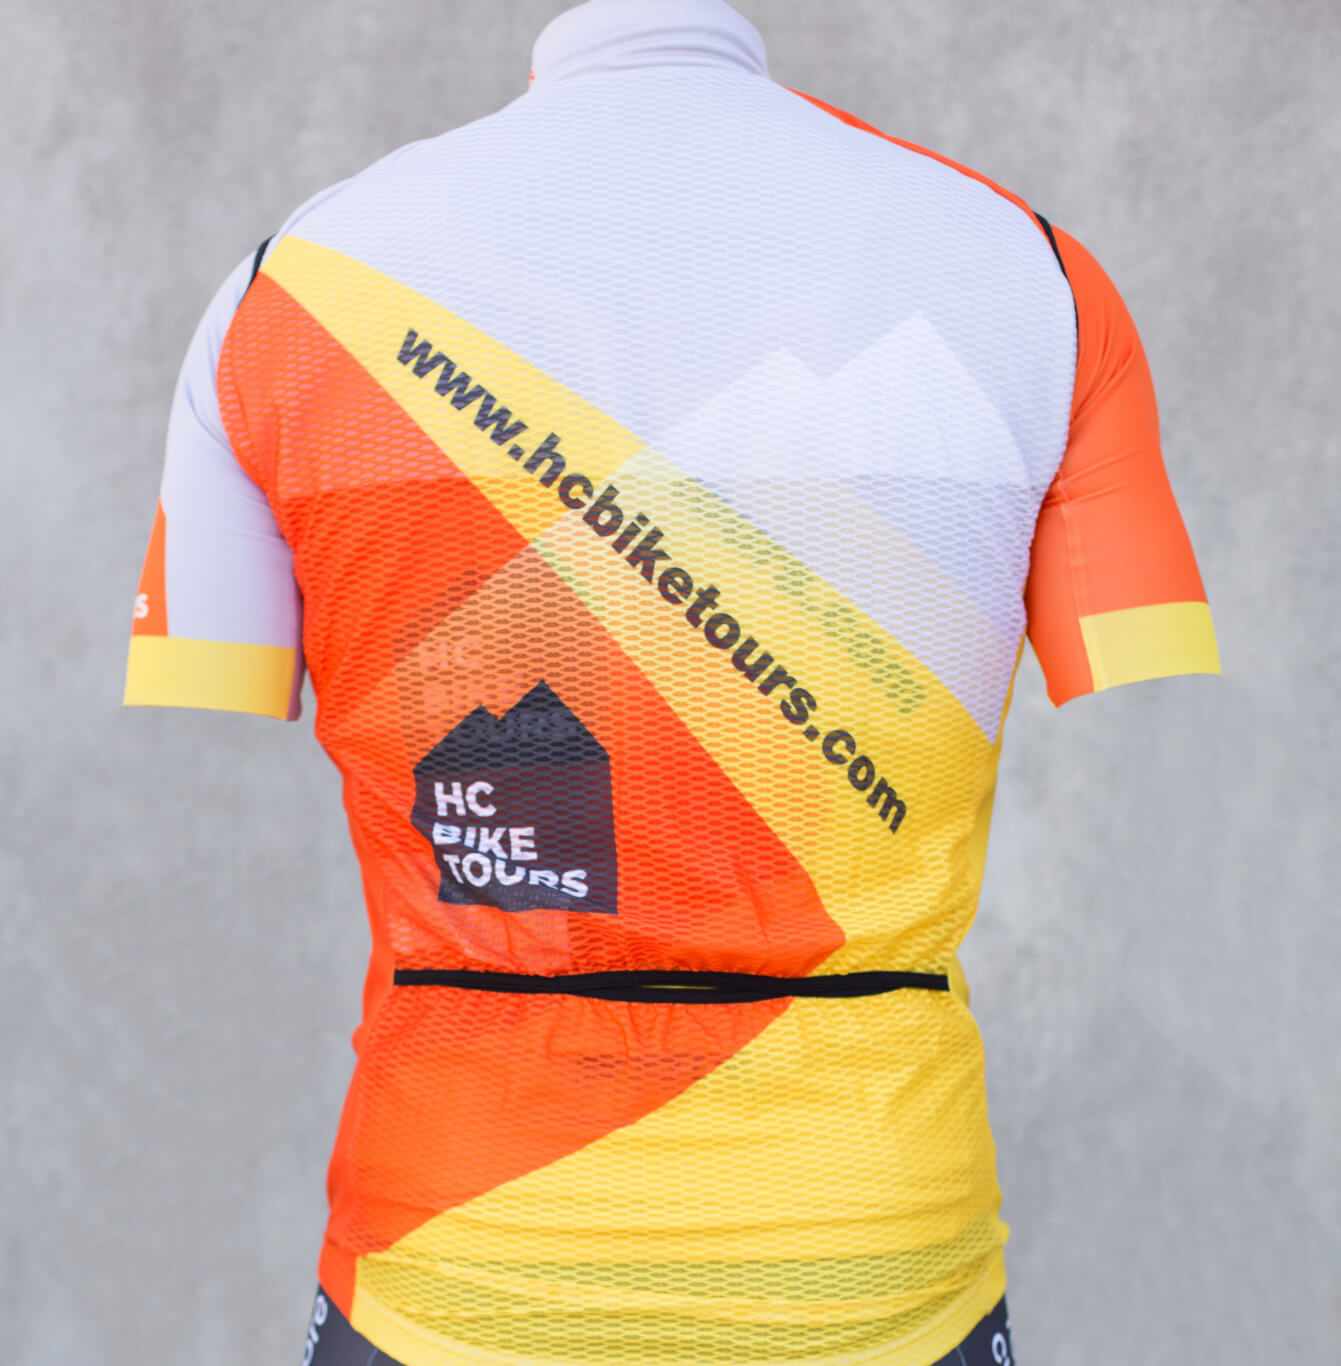 HC Bike Tours design cycling body/vest made by Bioracer